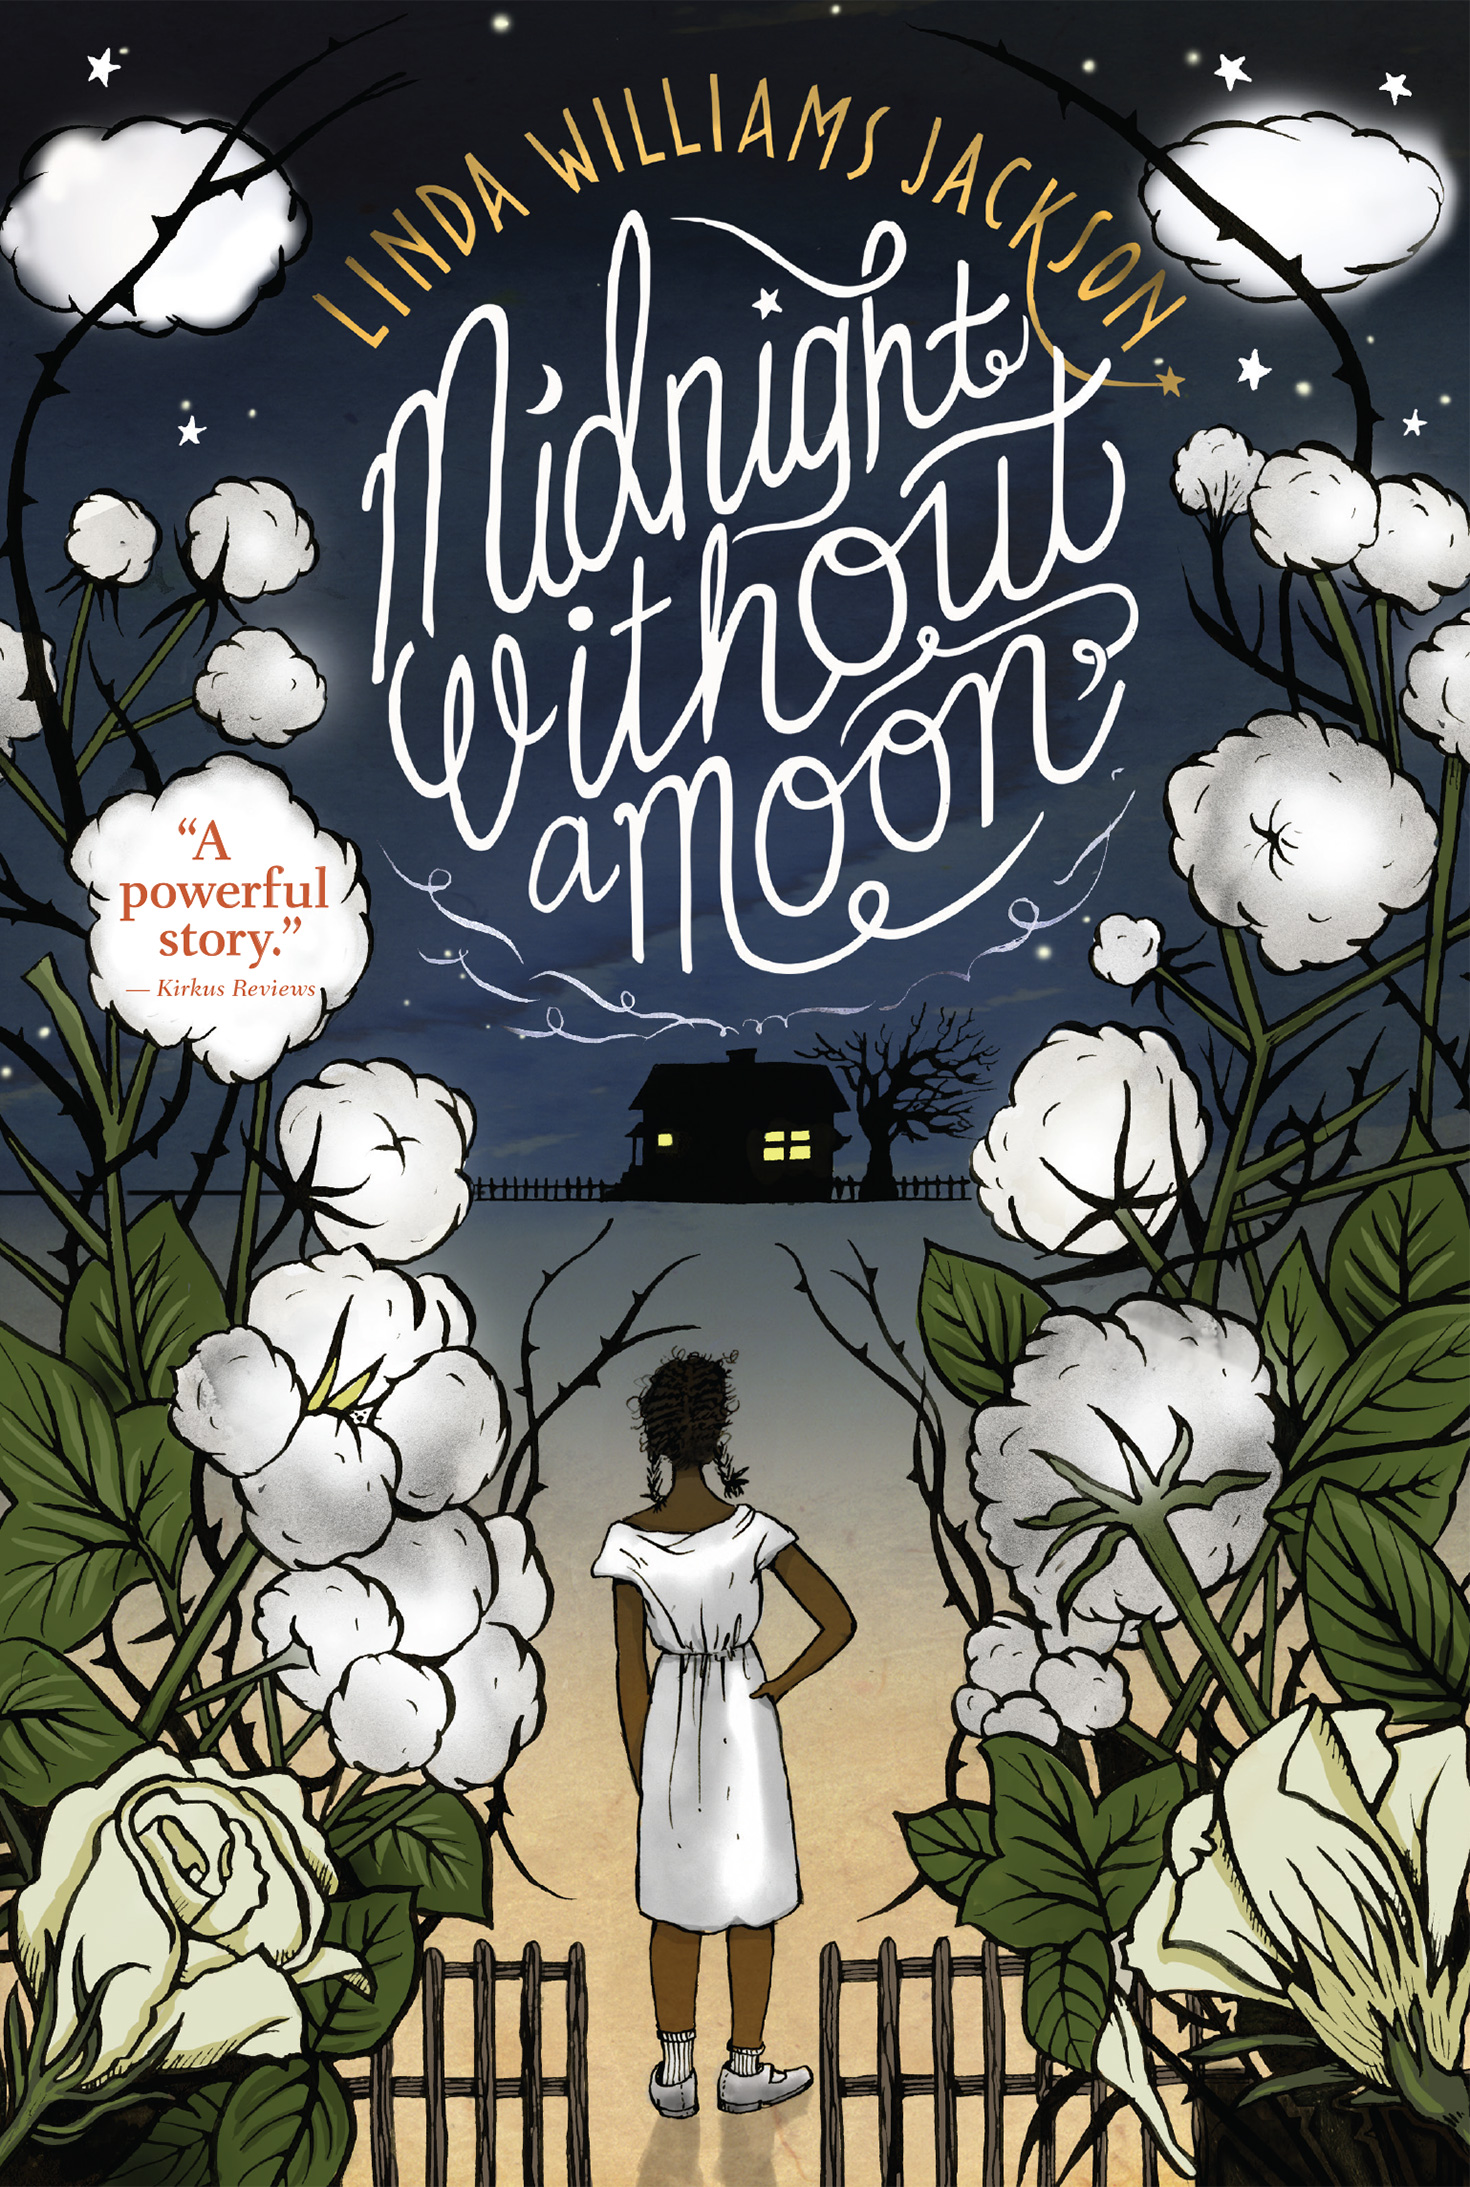 Cover of Midnight Without A Moon depticing a black girl in a white dress facing away from the viewer, surrounded by white flowers and looking towards the silhouette of a house in the background with the lights in the windows illuminated.